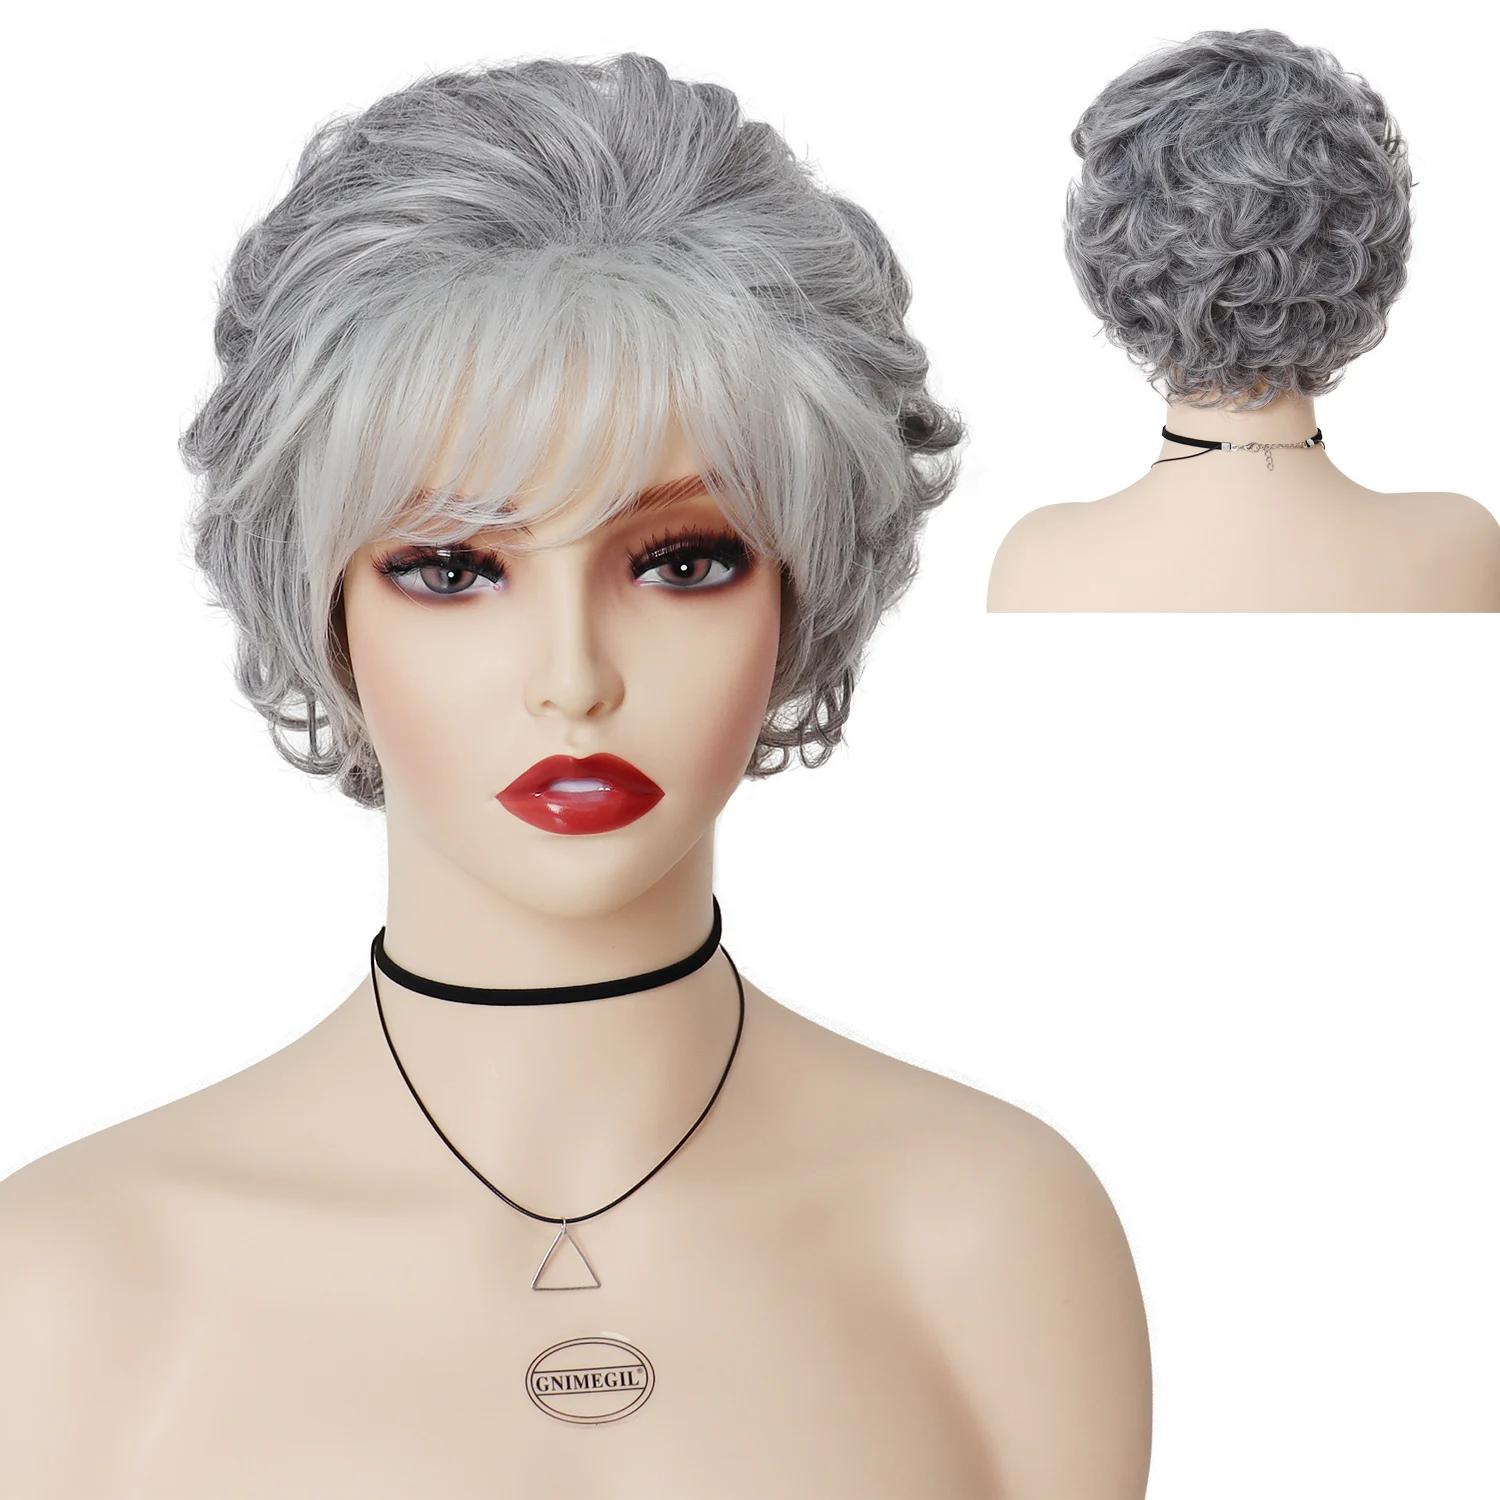 

GNIMEGIL Synthetic Short Curly Hair Grey Mommy Wig with Bangs for White Women Ombre Gray Wig Old Lady Costume Grandma Wig Ladies